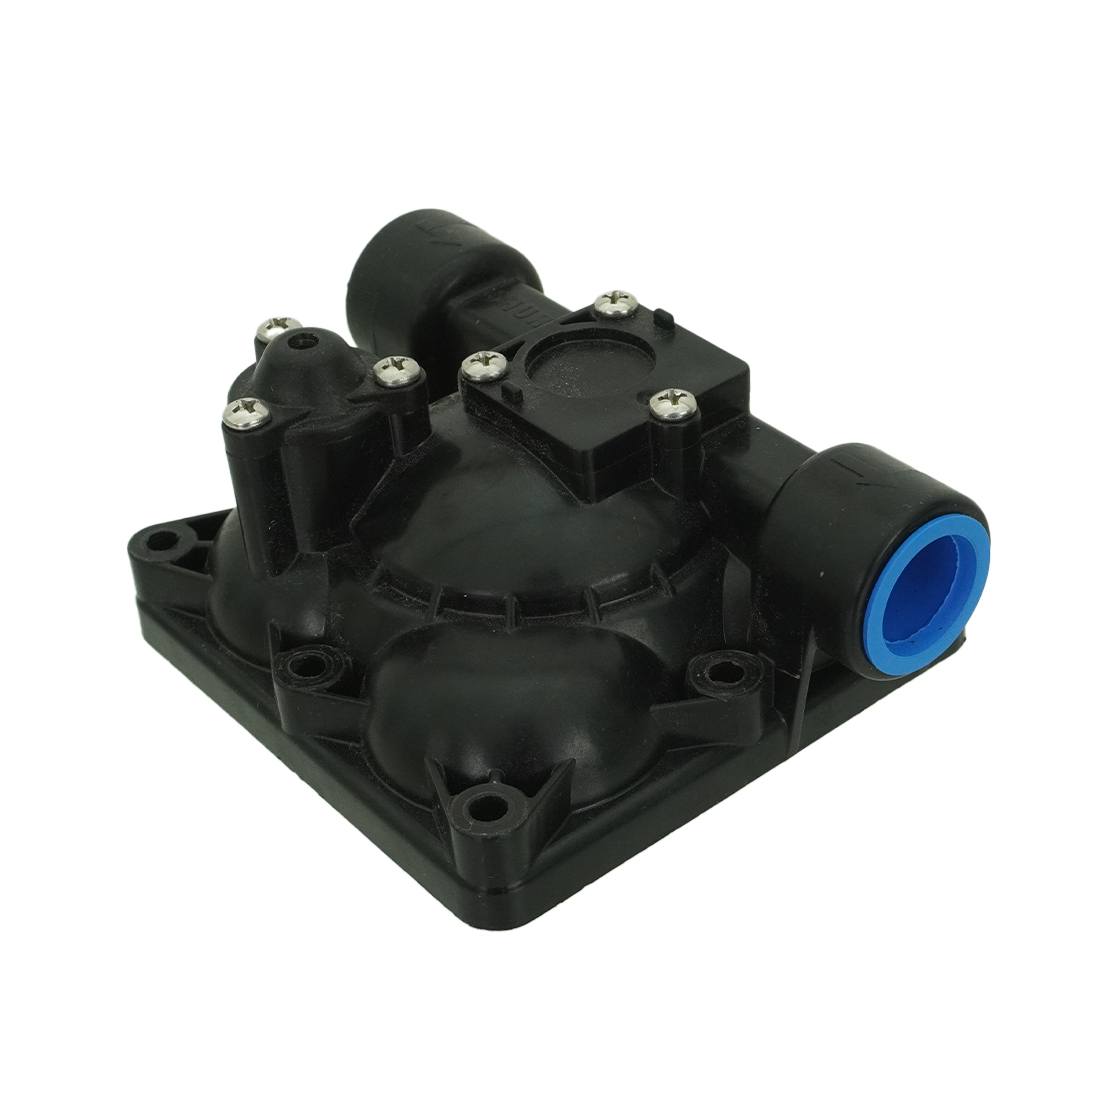 XERO 12V Booster Pump - Upper Housing Replacement Angle View